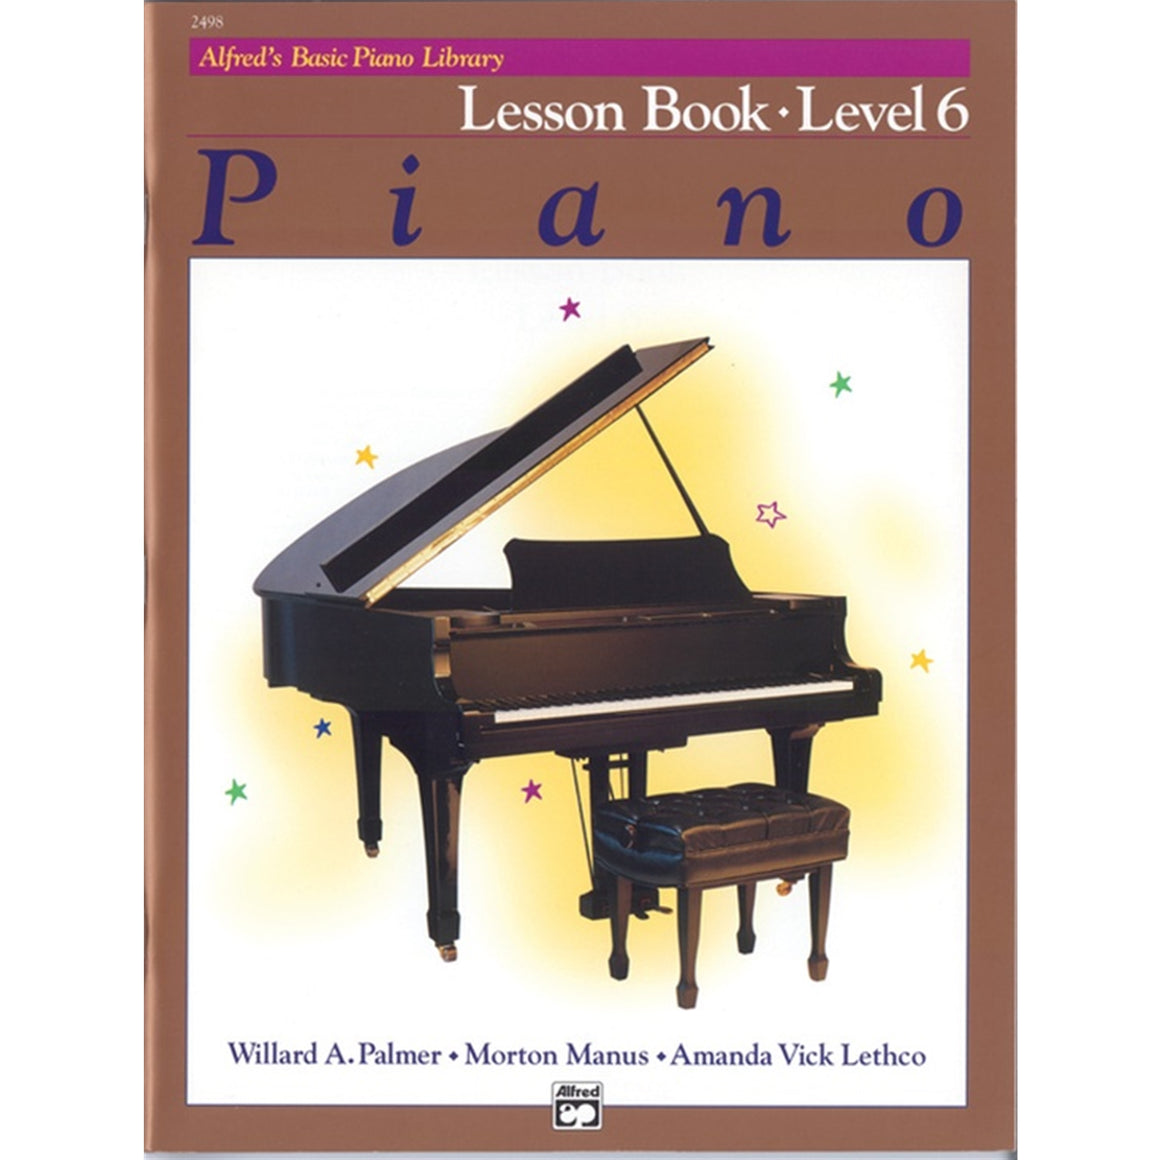 ALFRED 2498 Alfred's Basic Piano Library: Lesson Book 6